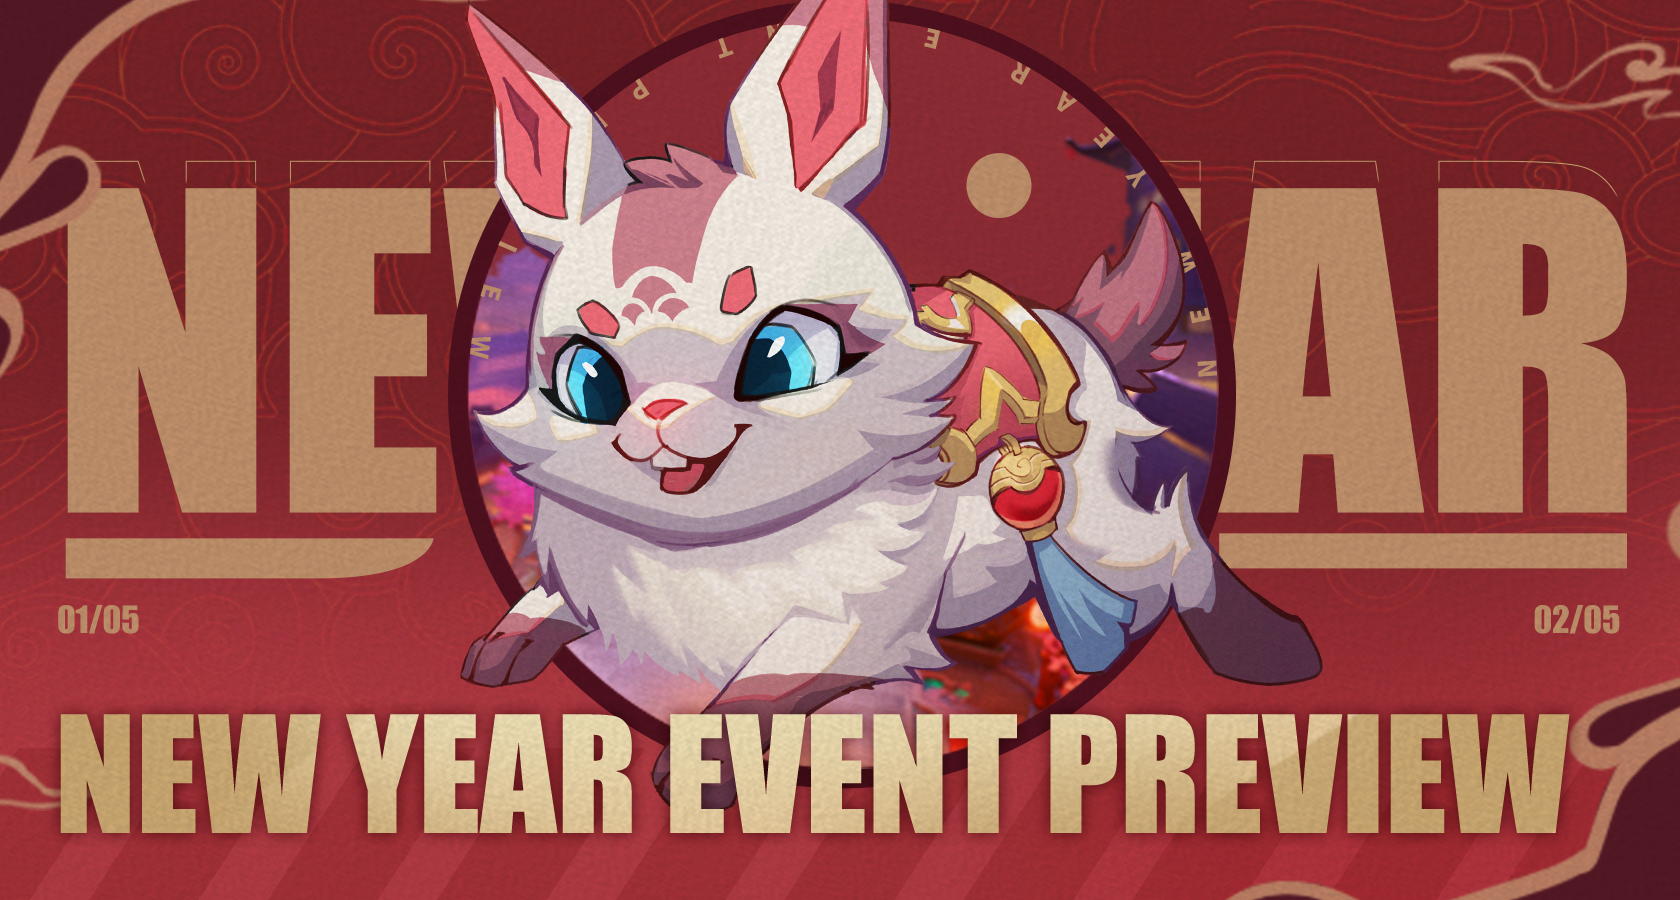 New Year Event Preview